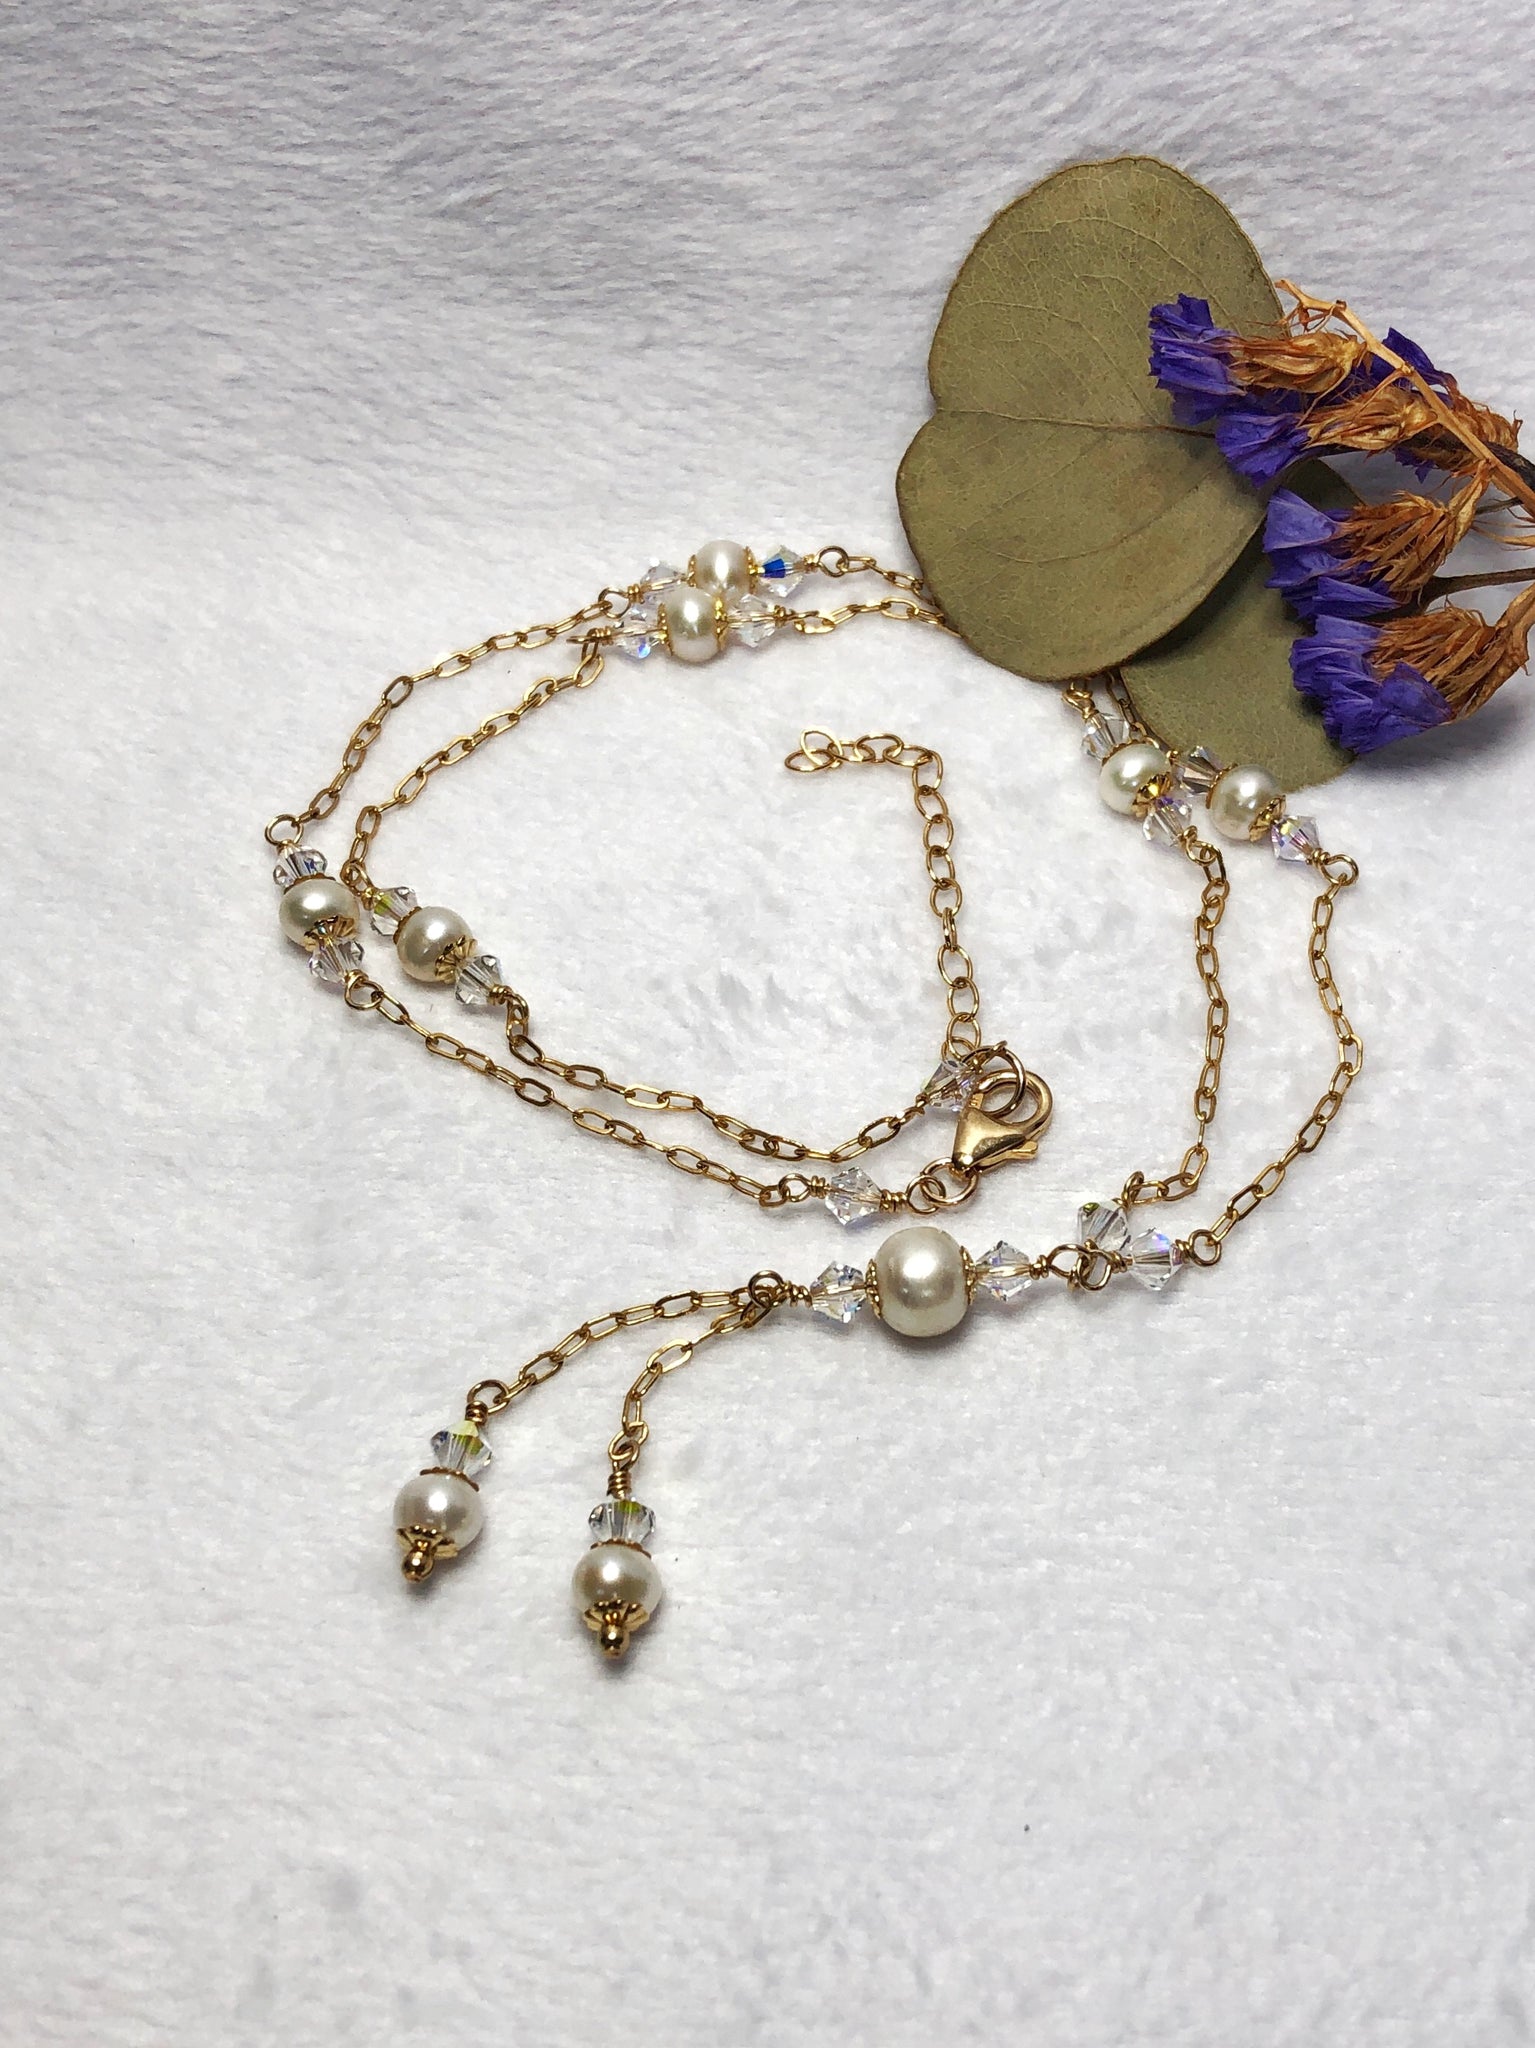 Freshwater pearl Swarovski crystal gold filled necklace laying flat on a white background